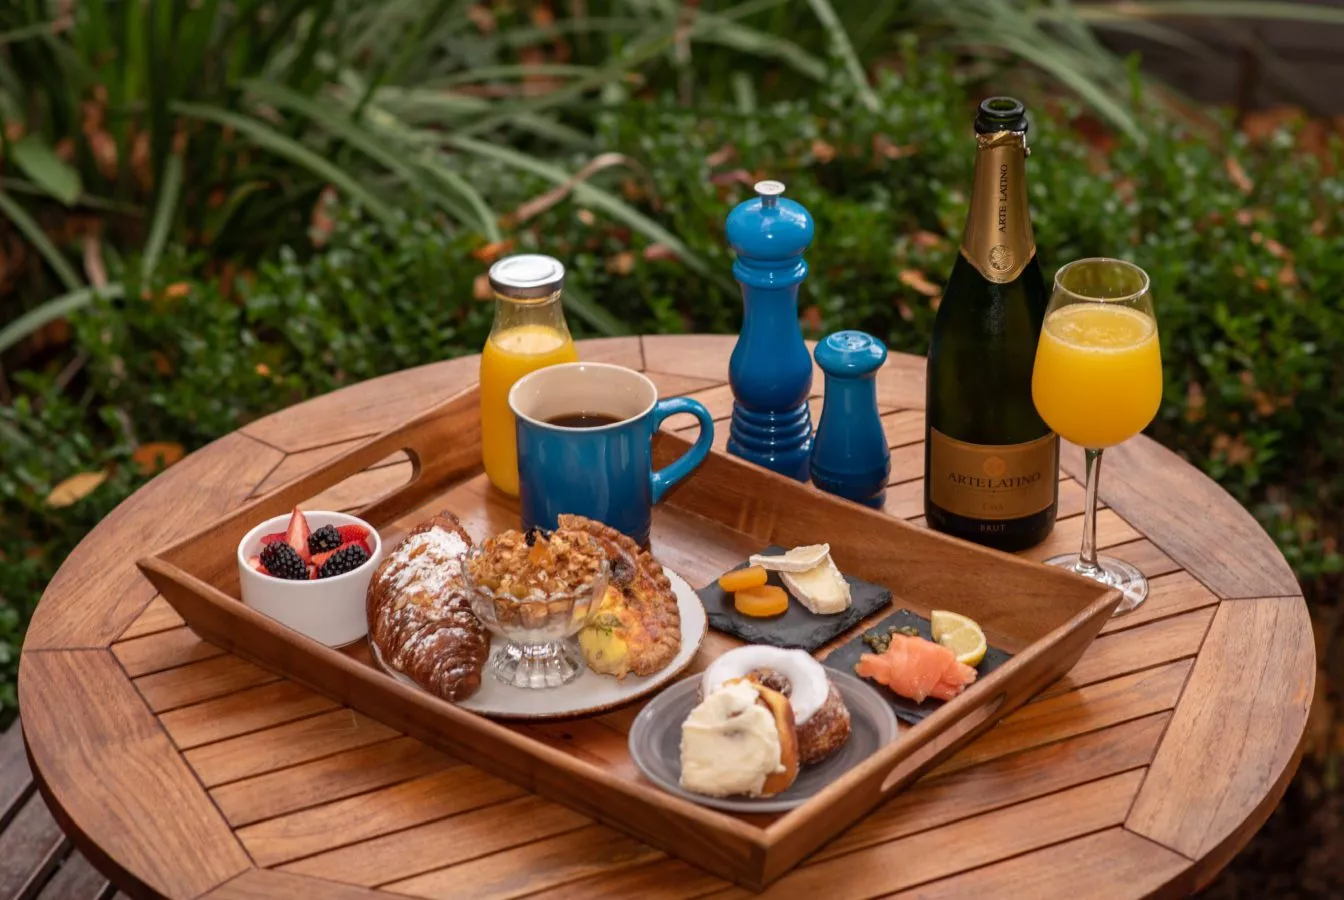 Breakfast tray on wooden table with croissants, fruit, orange juice, mimosas, and coffee